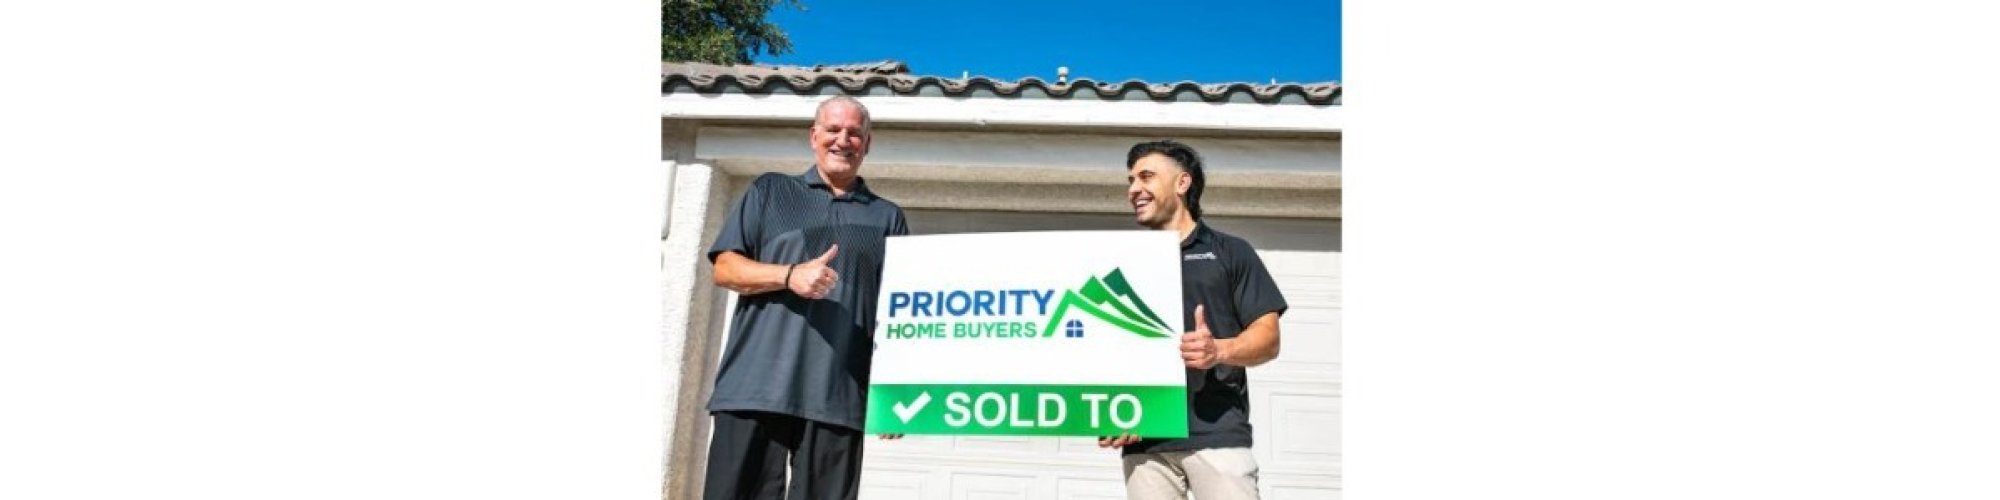 Priority Home Buyers | Sell My House Fast for Cash Fort Myers